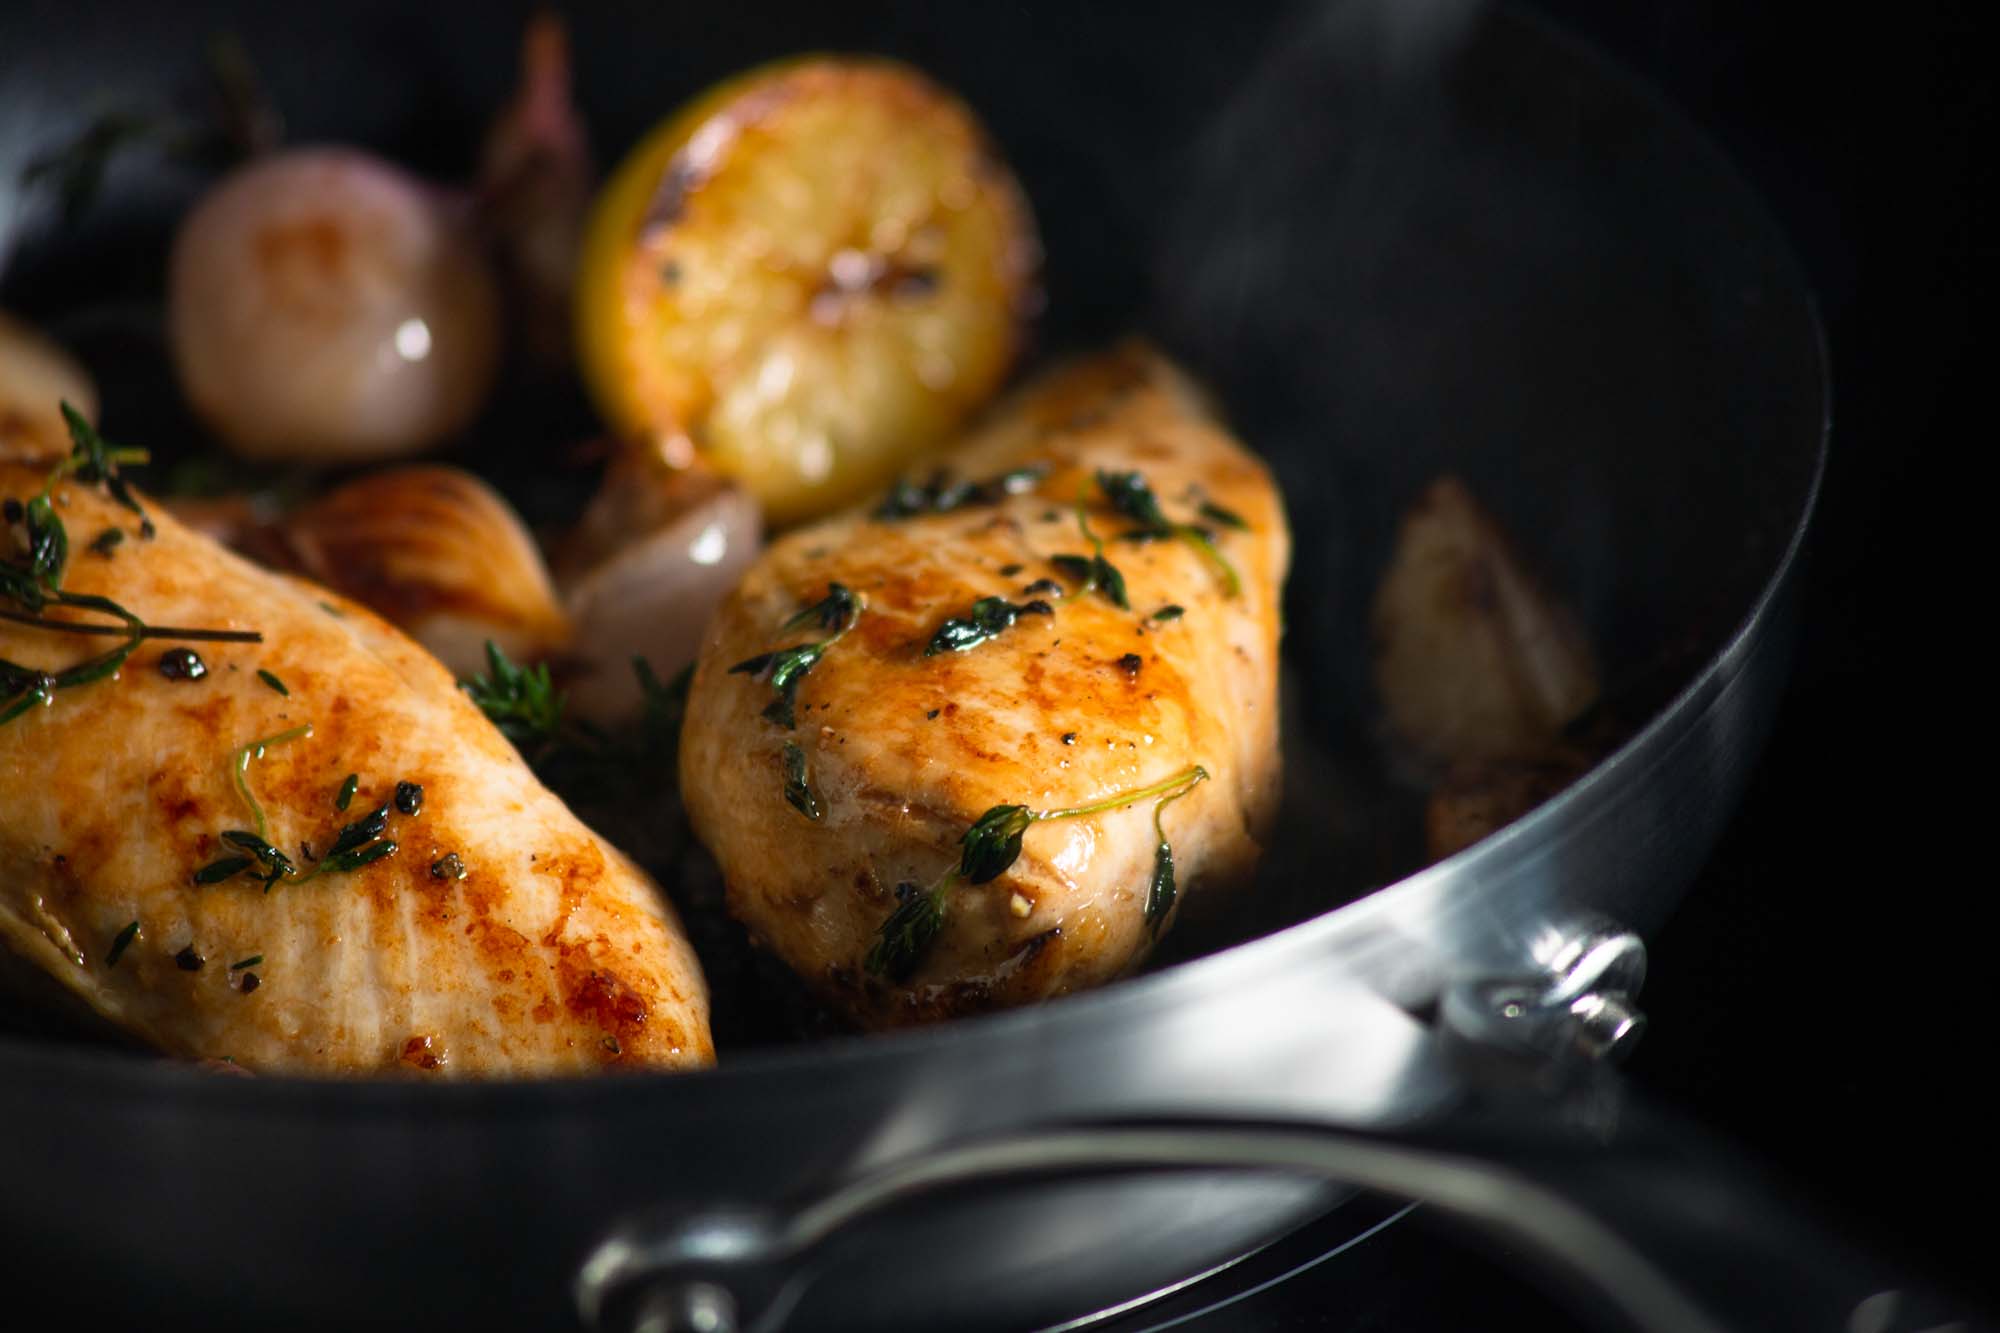 Chicken with herbs being cooked in a Circulon frying pan